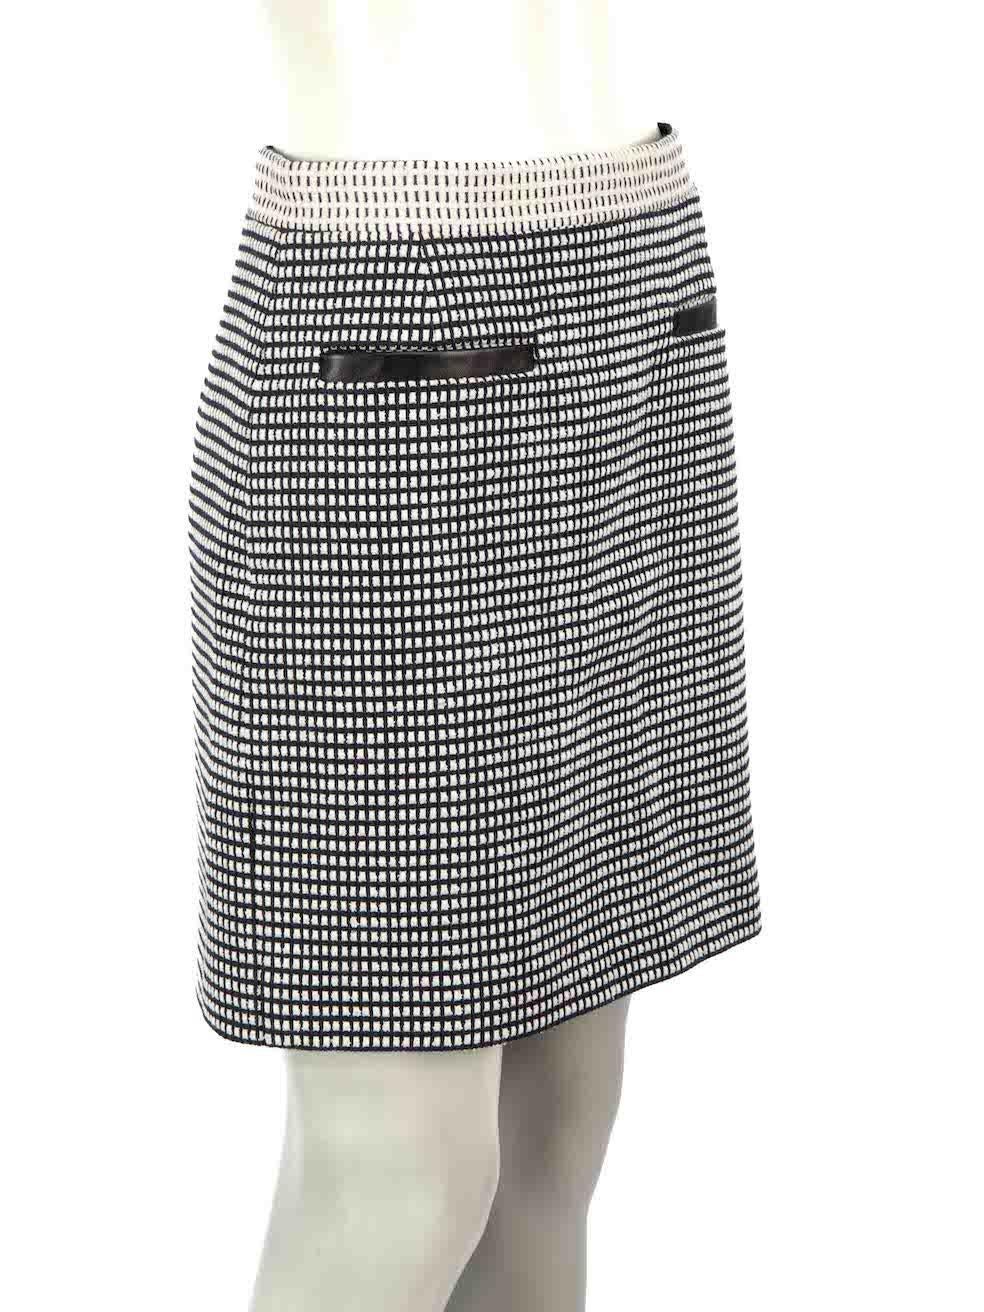 CONDITION is Very good. Hardly any visible wear to skirt is evident on this used Proenza Schouler designer resale item.
 
Details
Multicolour
Cotton
Mini skirt
Navy, white and black
Figure hugging fit
Leather trim pockets
2x Front pockets
Back zip